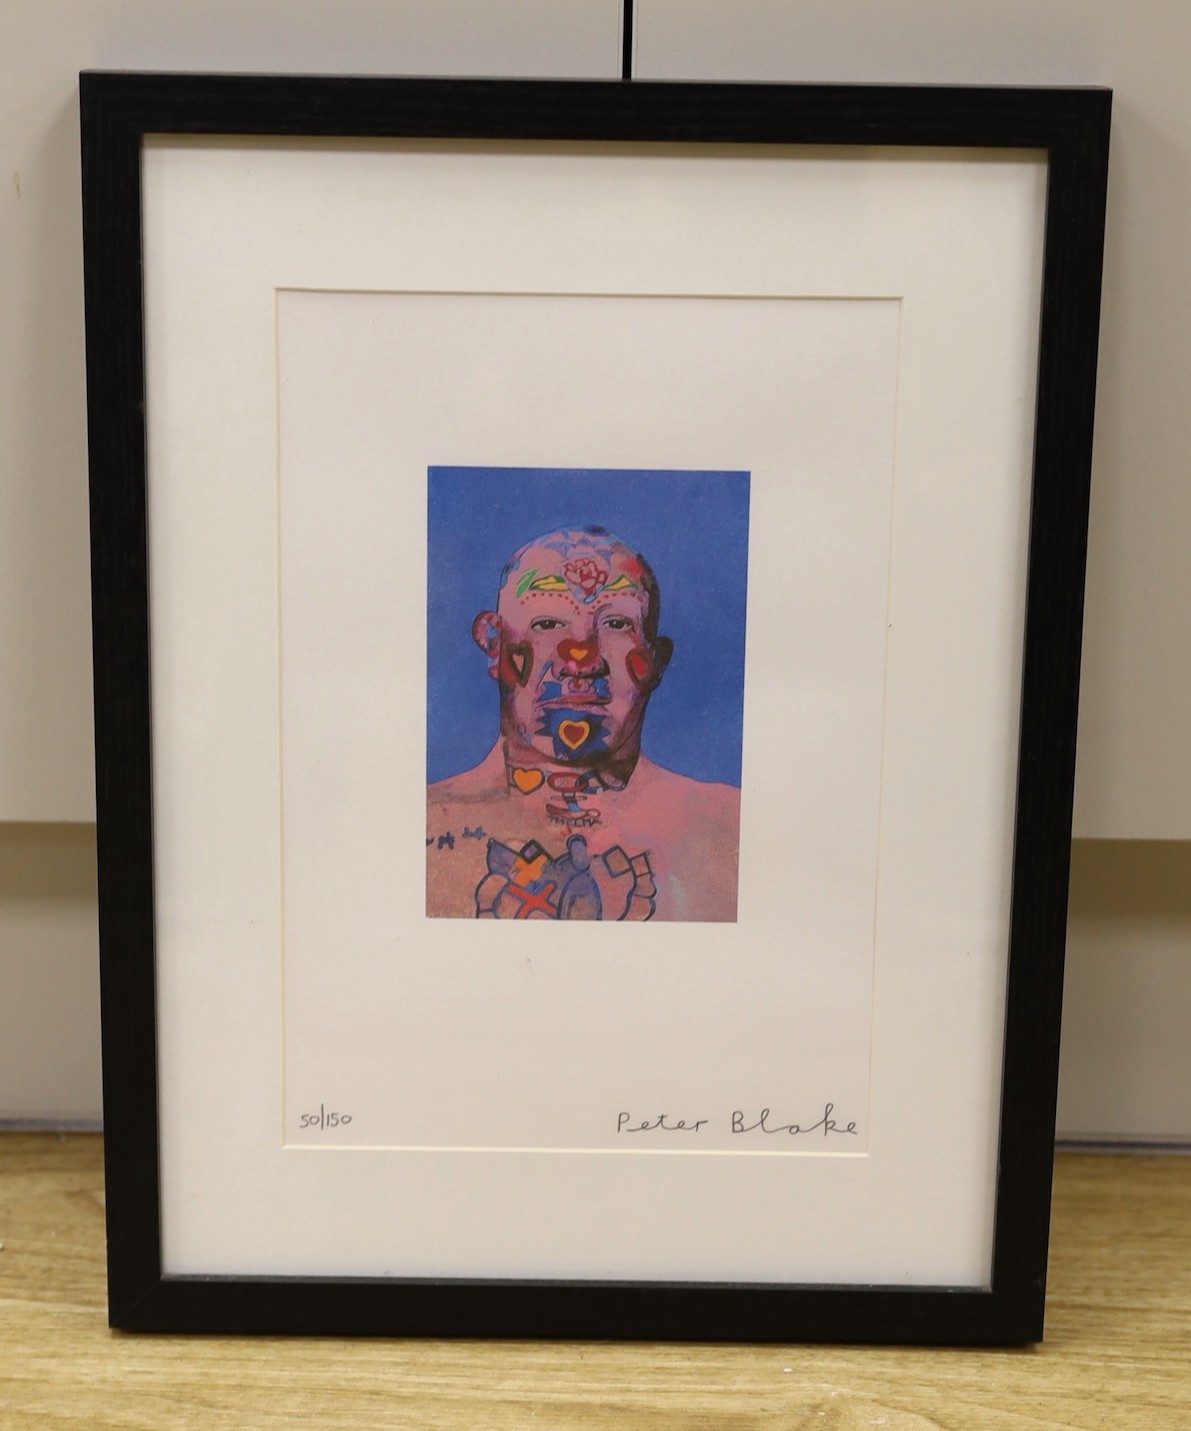 Peter Blake (1932-), ink jet print in colours, Tattooed Man, 2015, signed in pencil, 50/150, overall 29 x 20cm